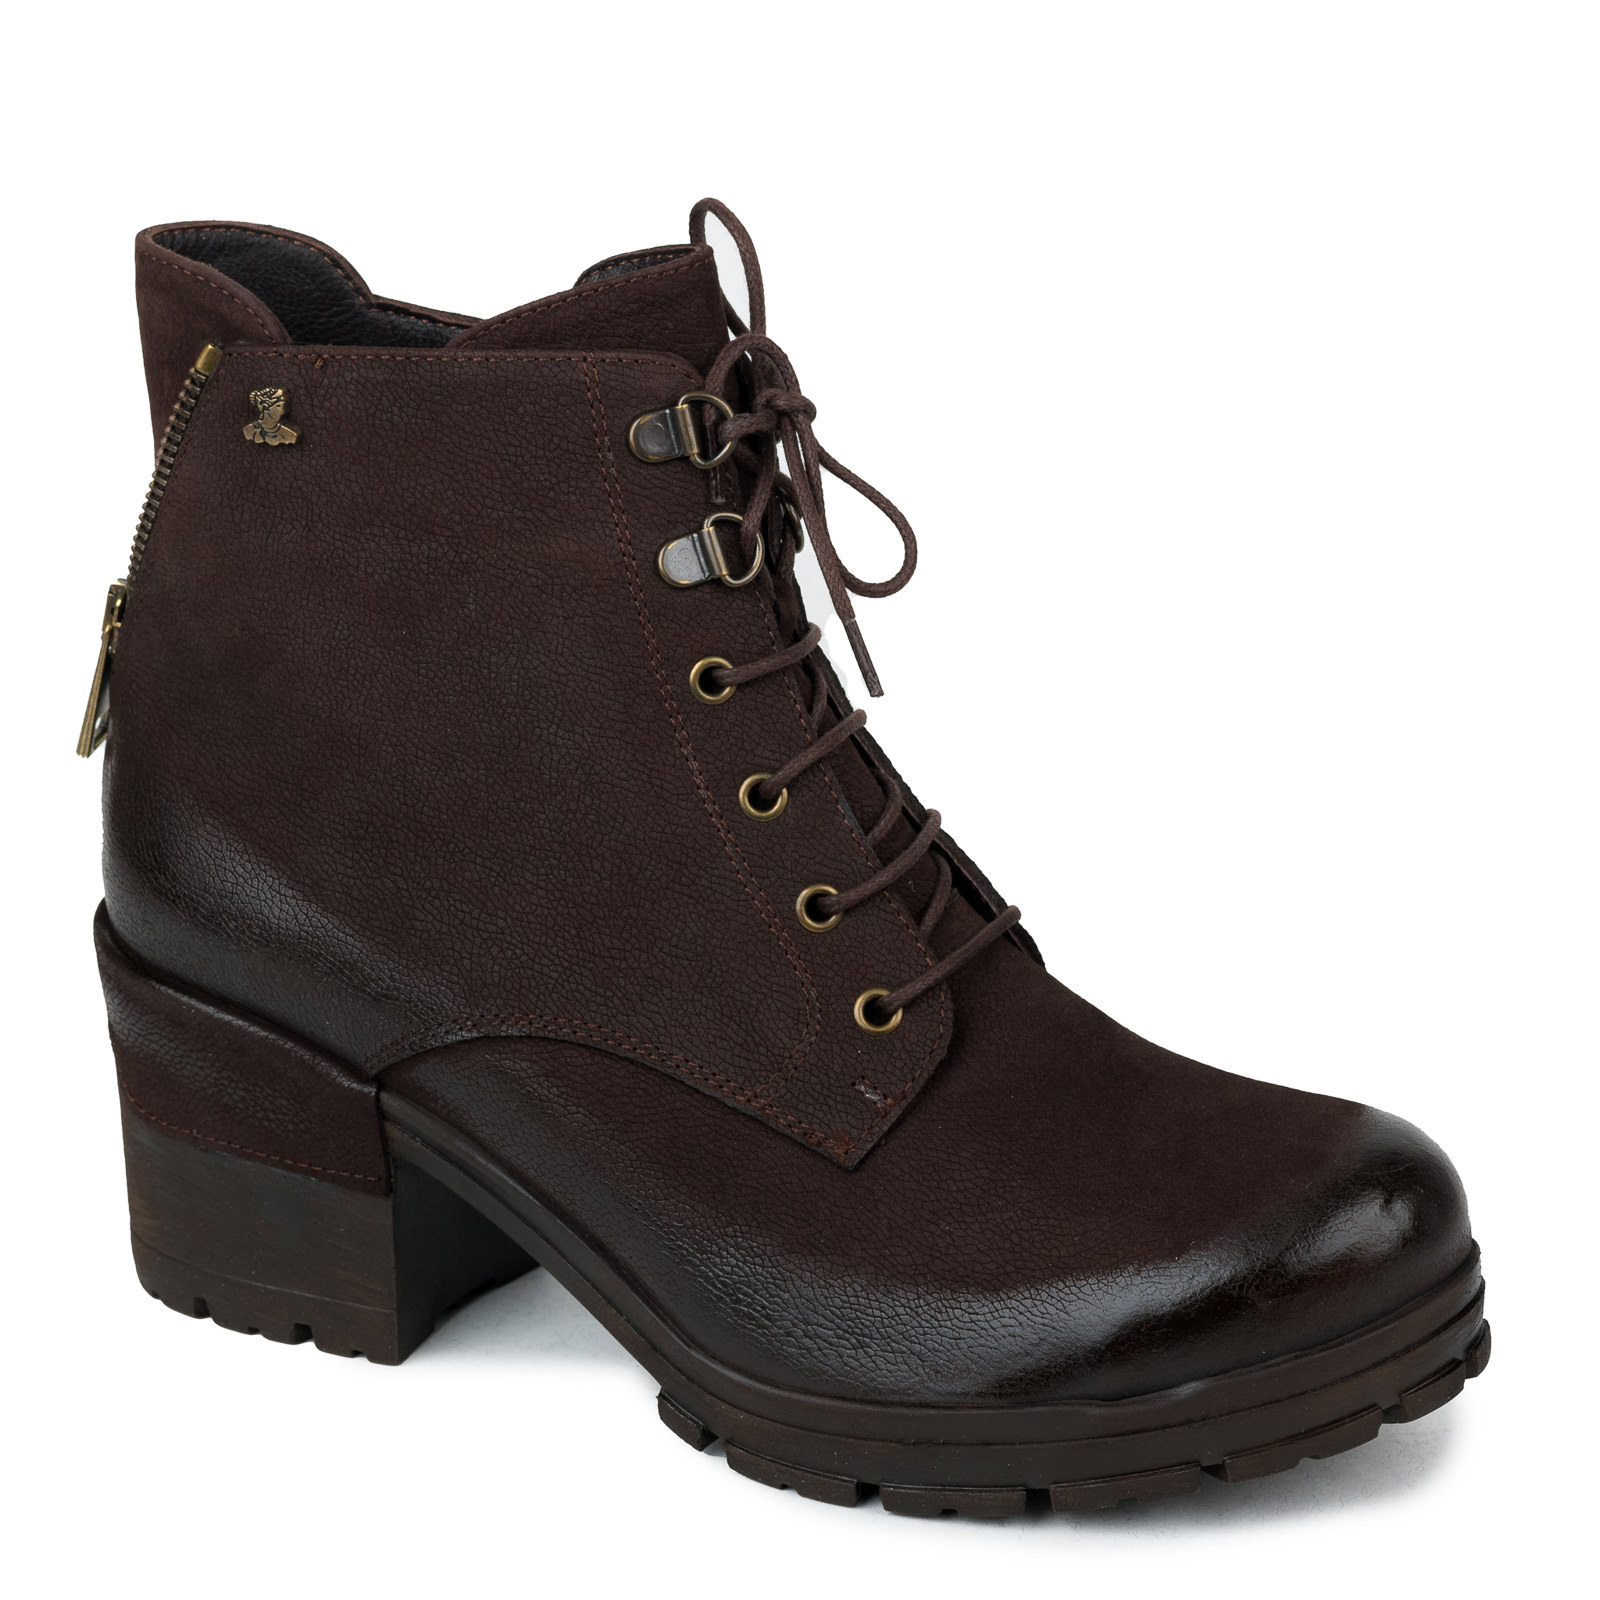 Leather ankle boots B431 - BROWN